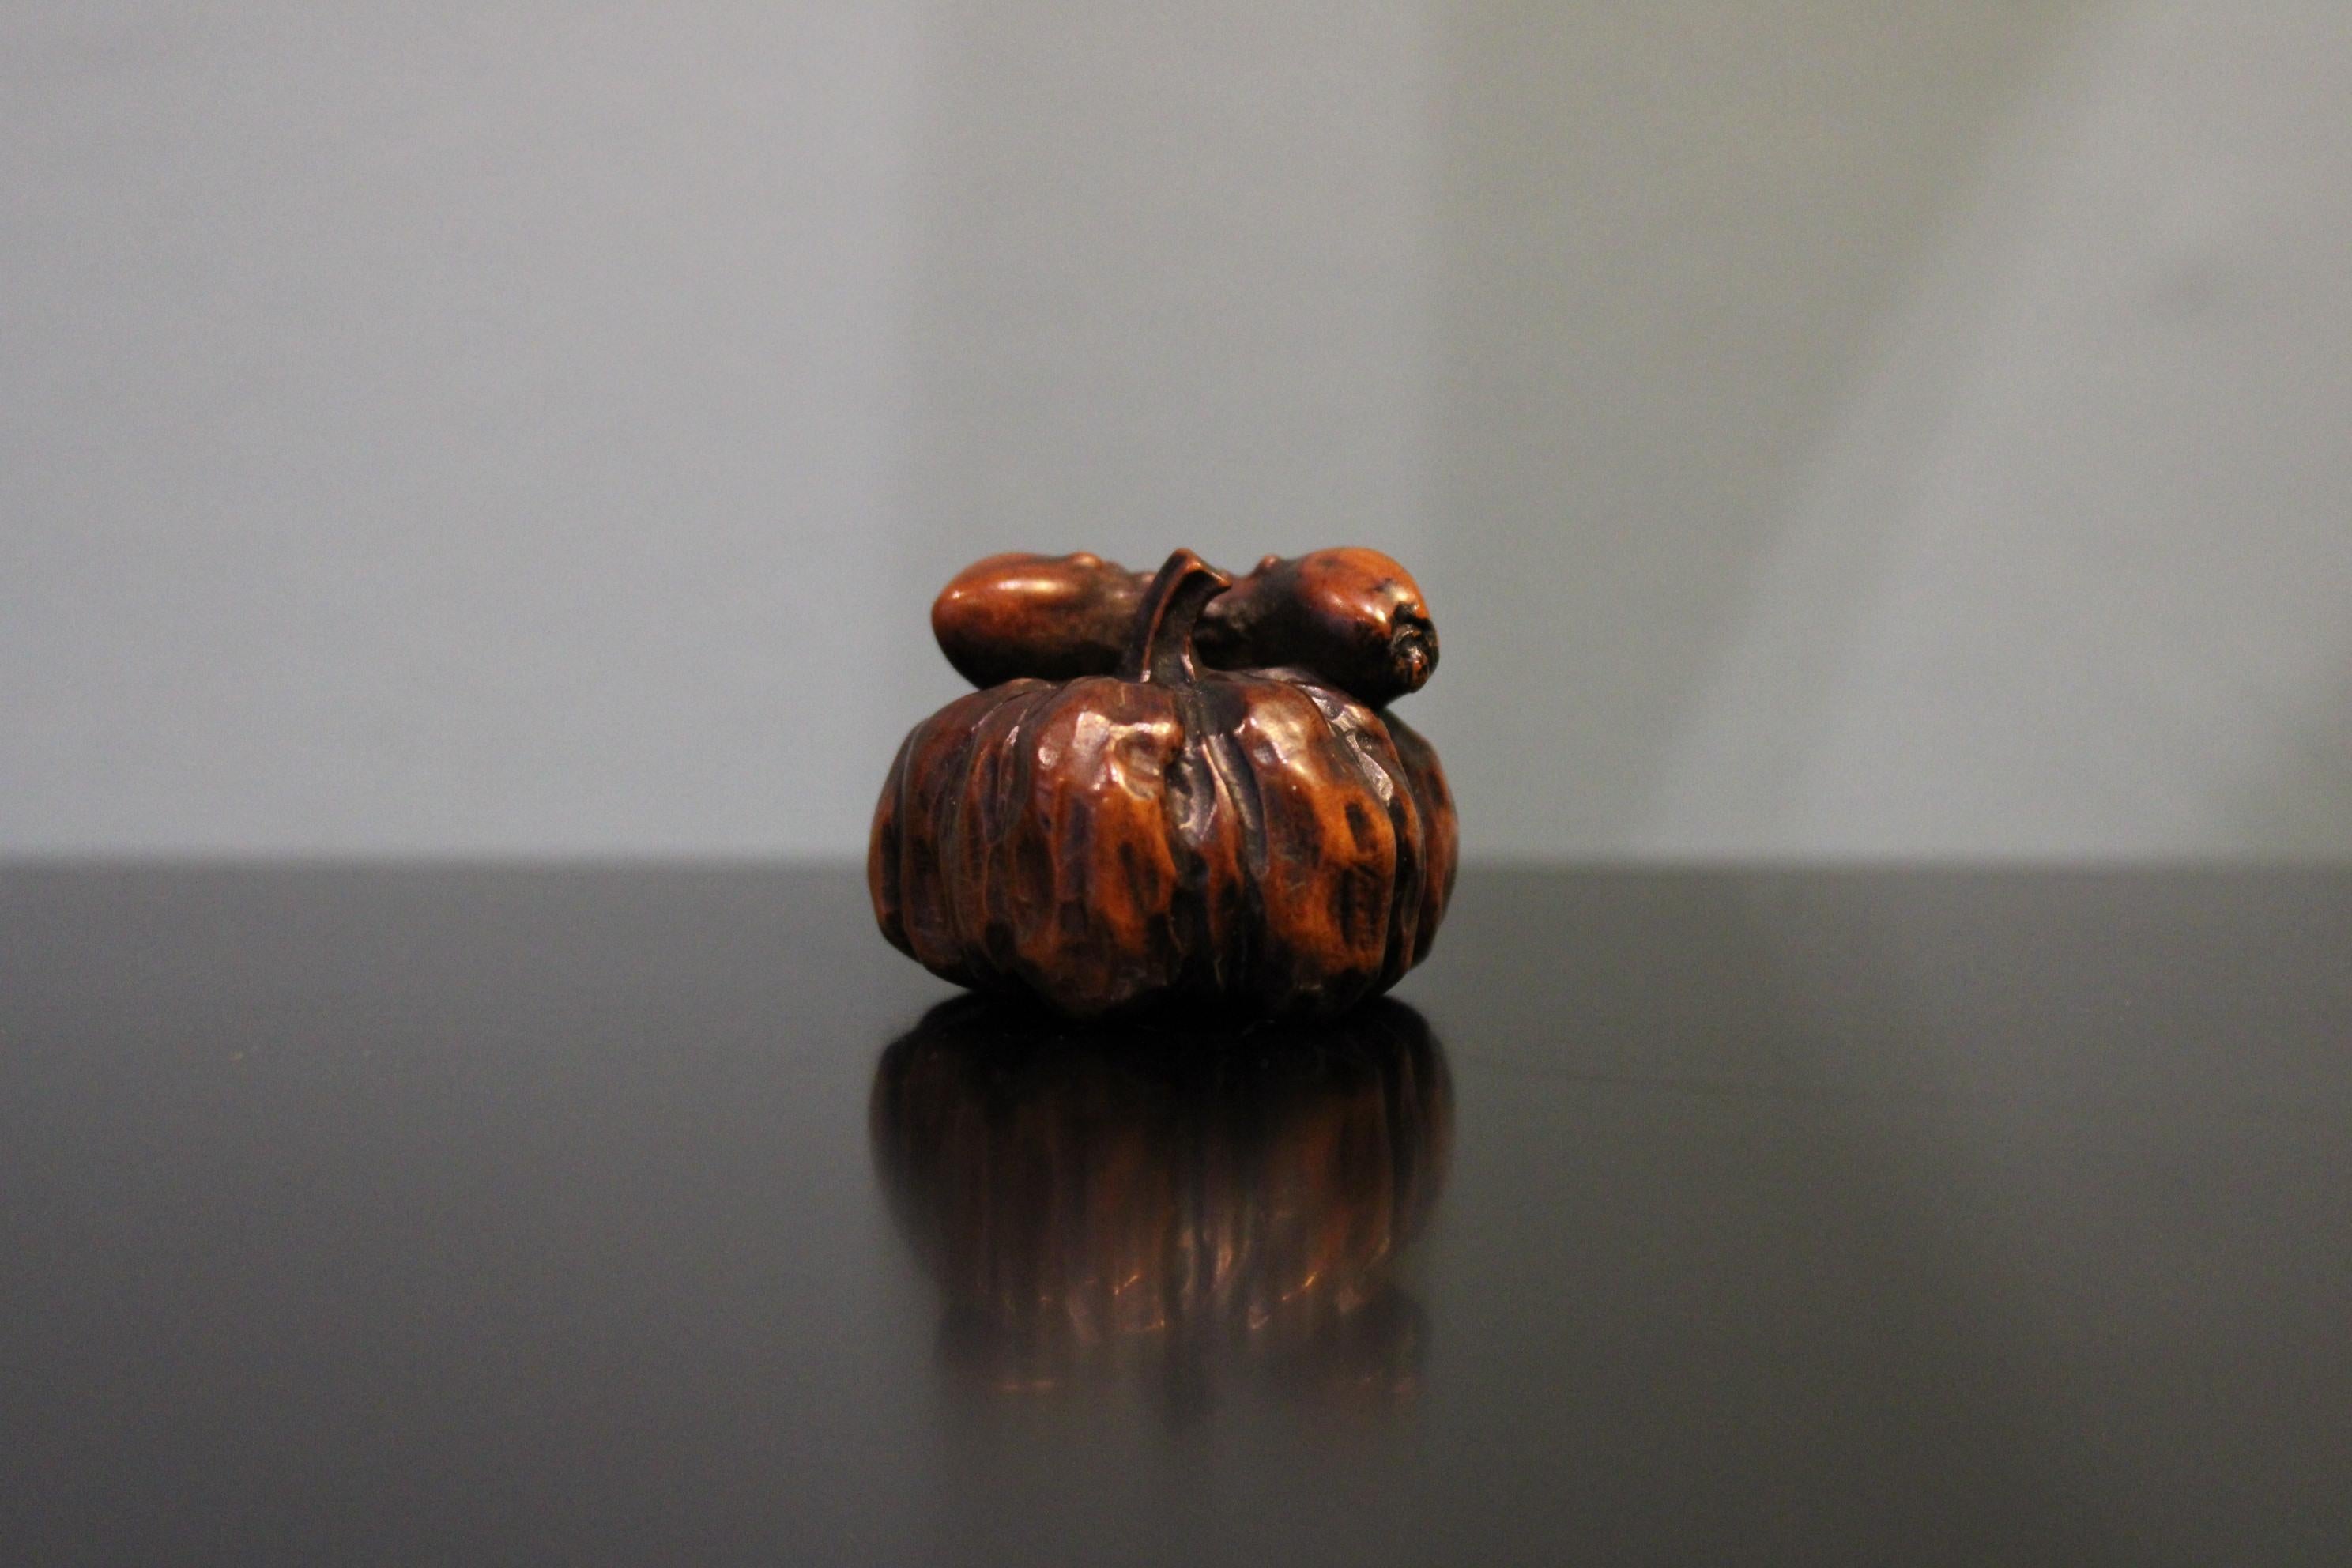 Japan Netsuke, circa 1900.
Bitter apple.
Carved and patinated boxwood.
Measures: H. 2.5 cm. L. 3.5 cm.